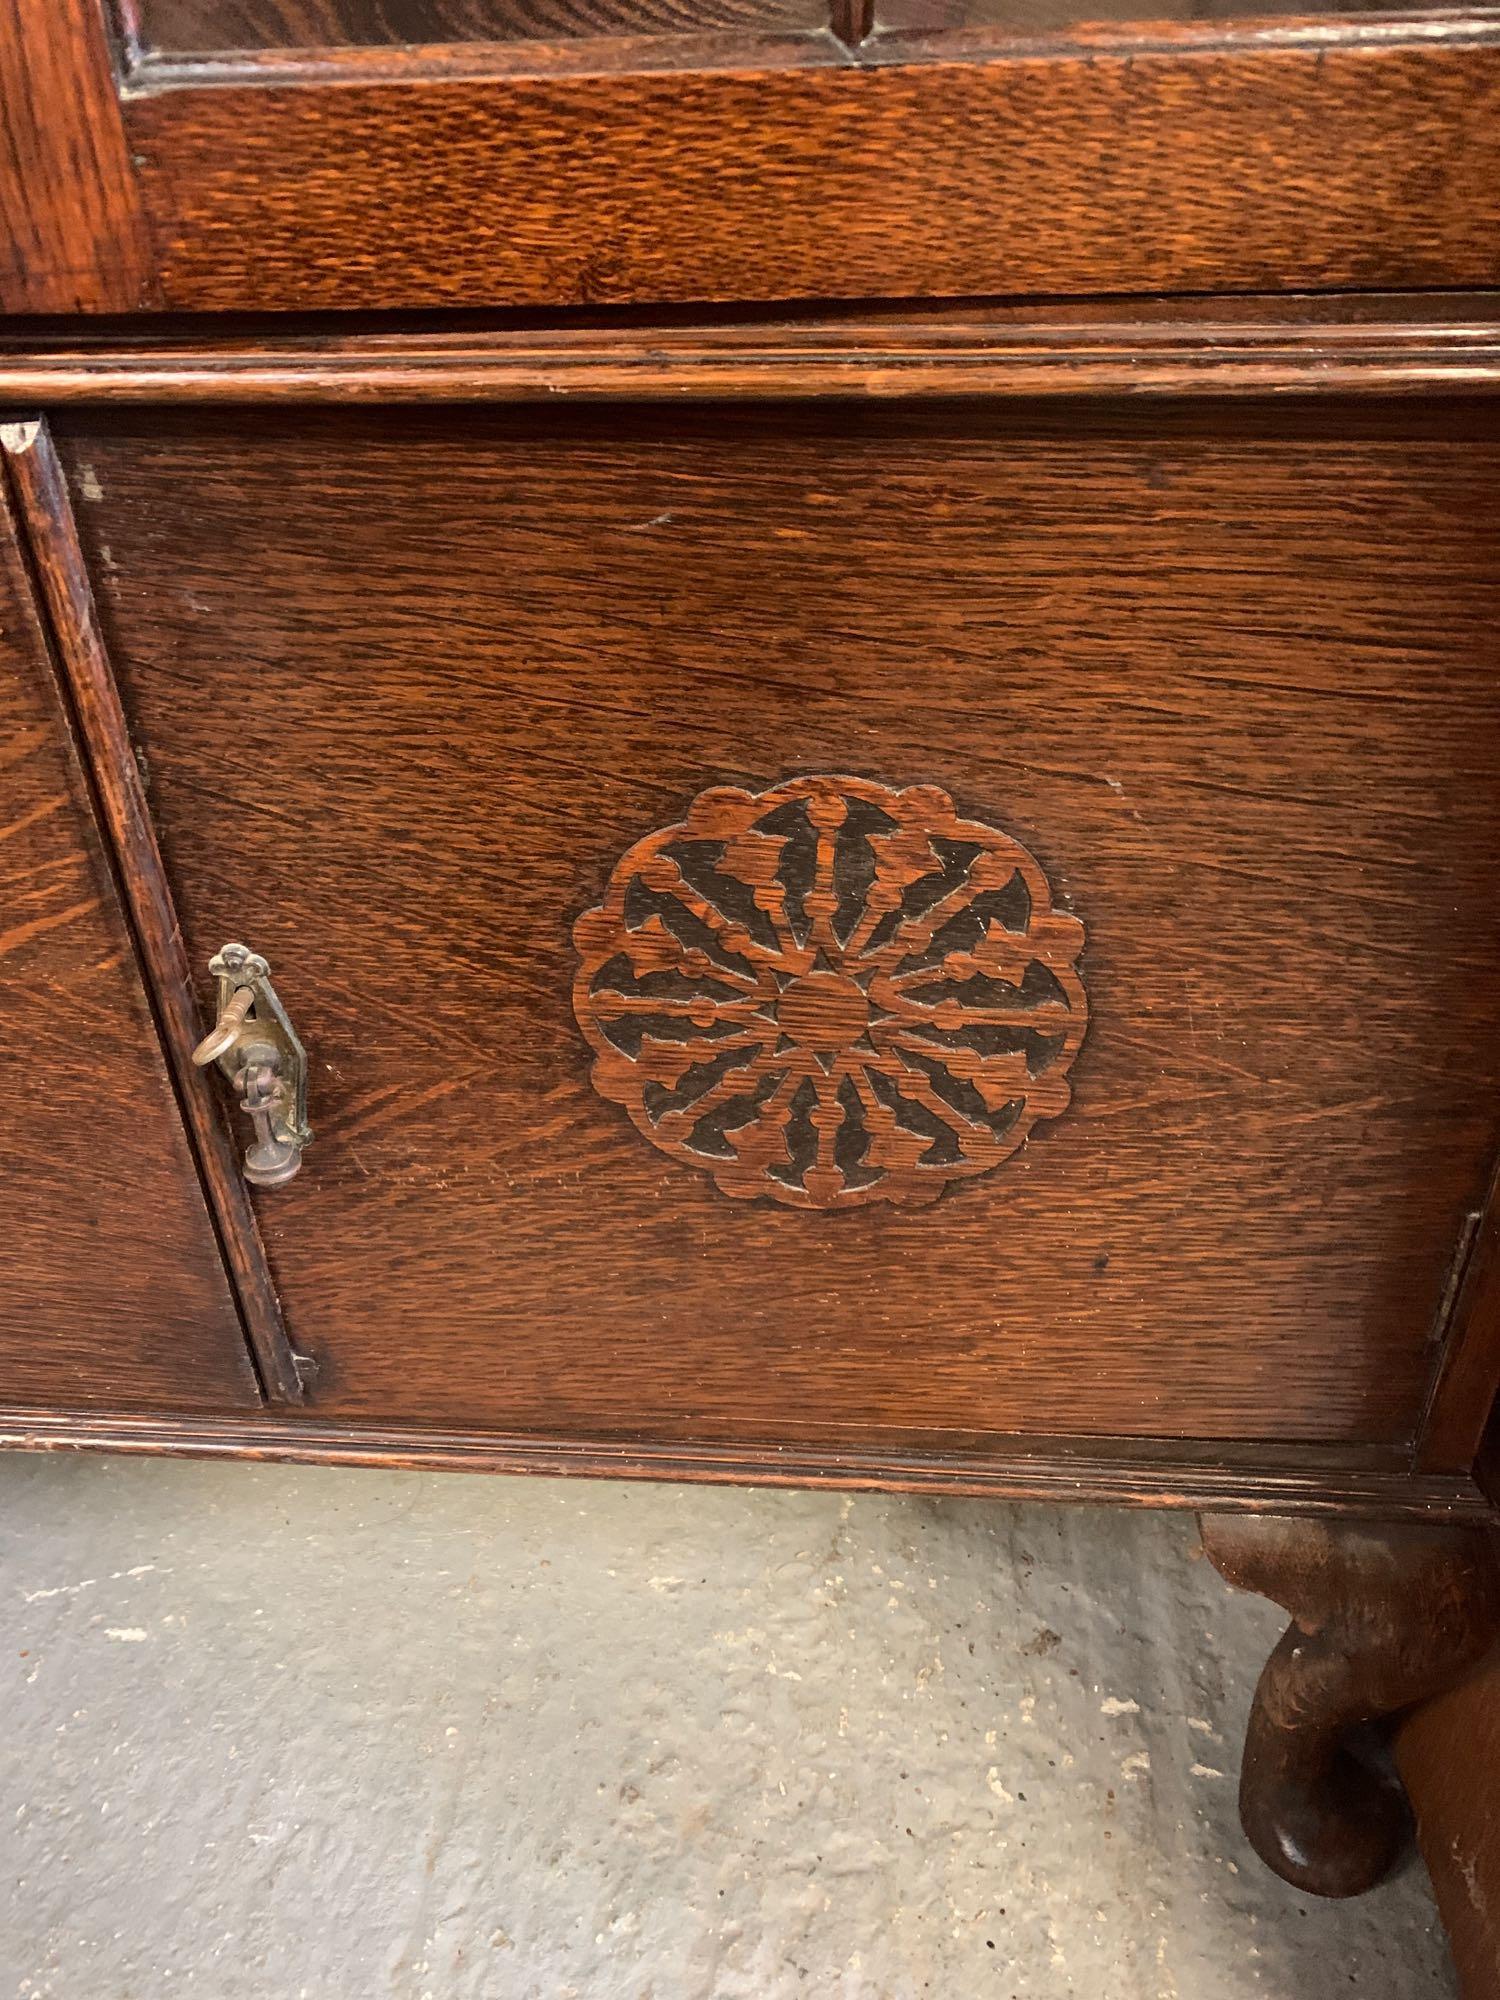 MAHOGANY GLASS FRONTED CABINET ## KEY ## - Image 3 of 3